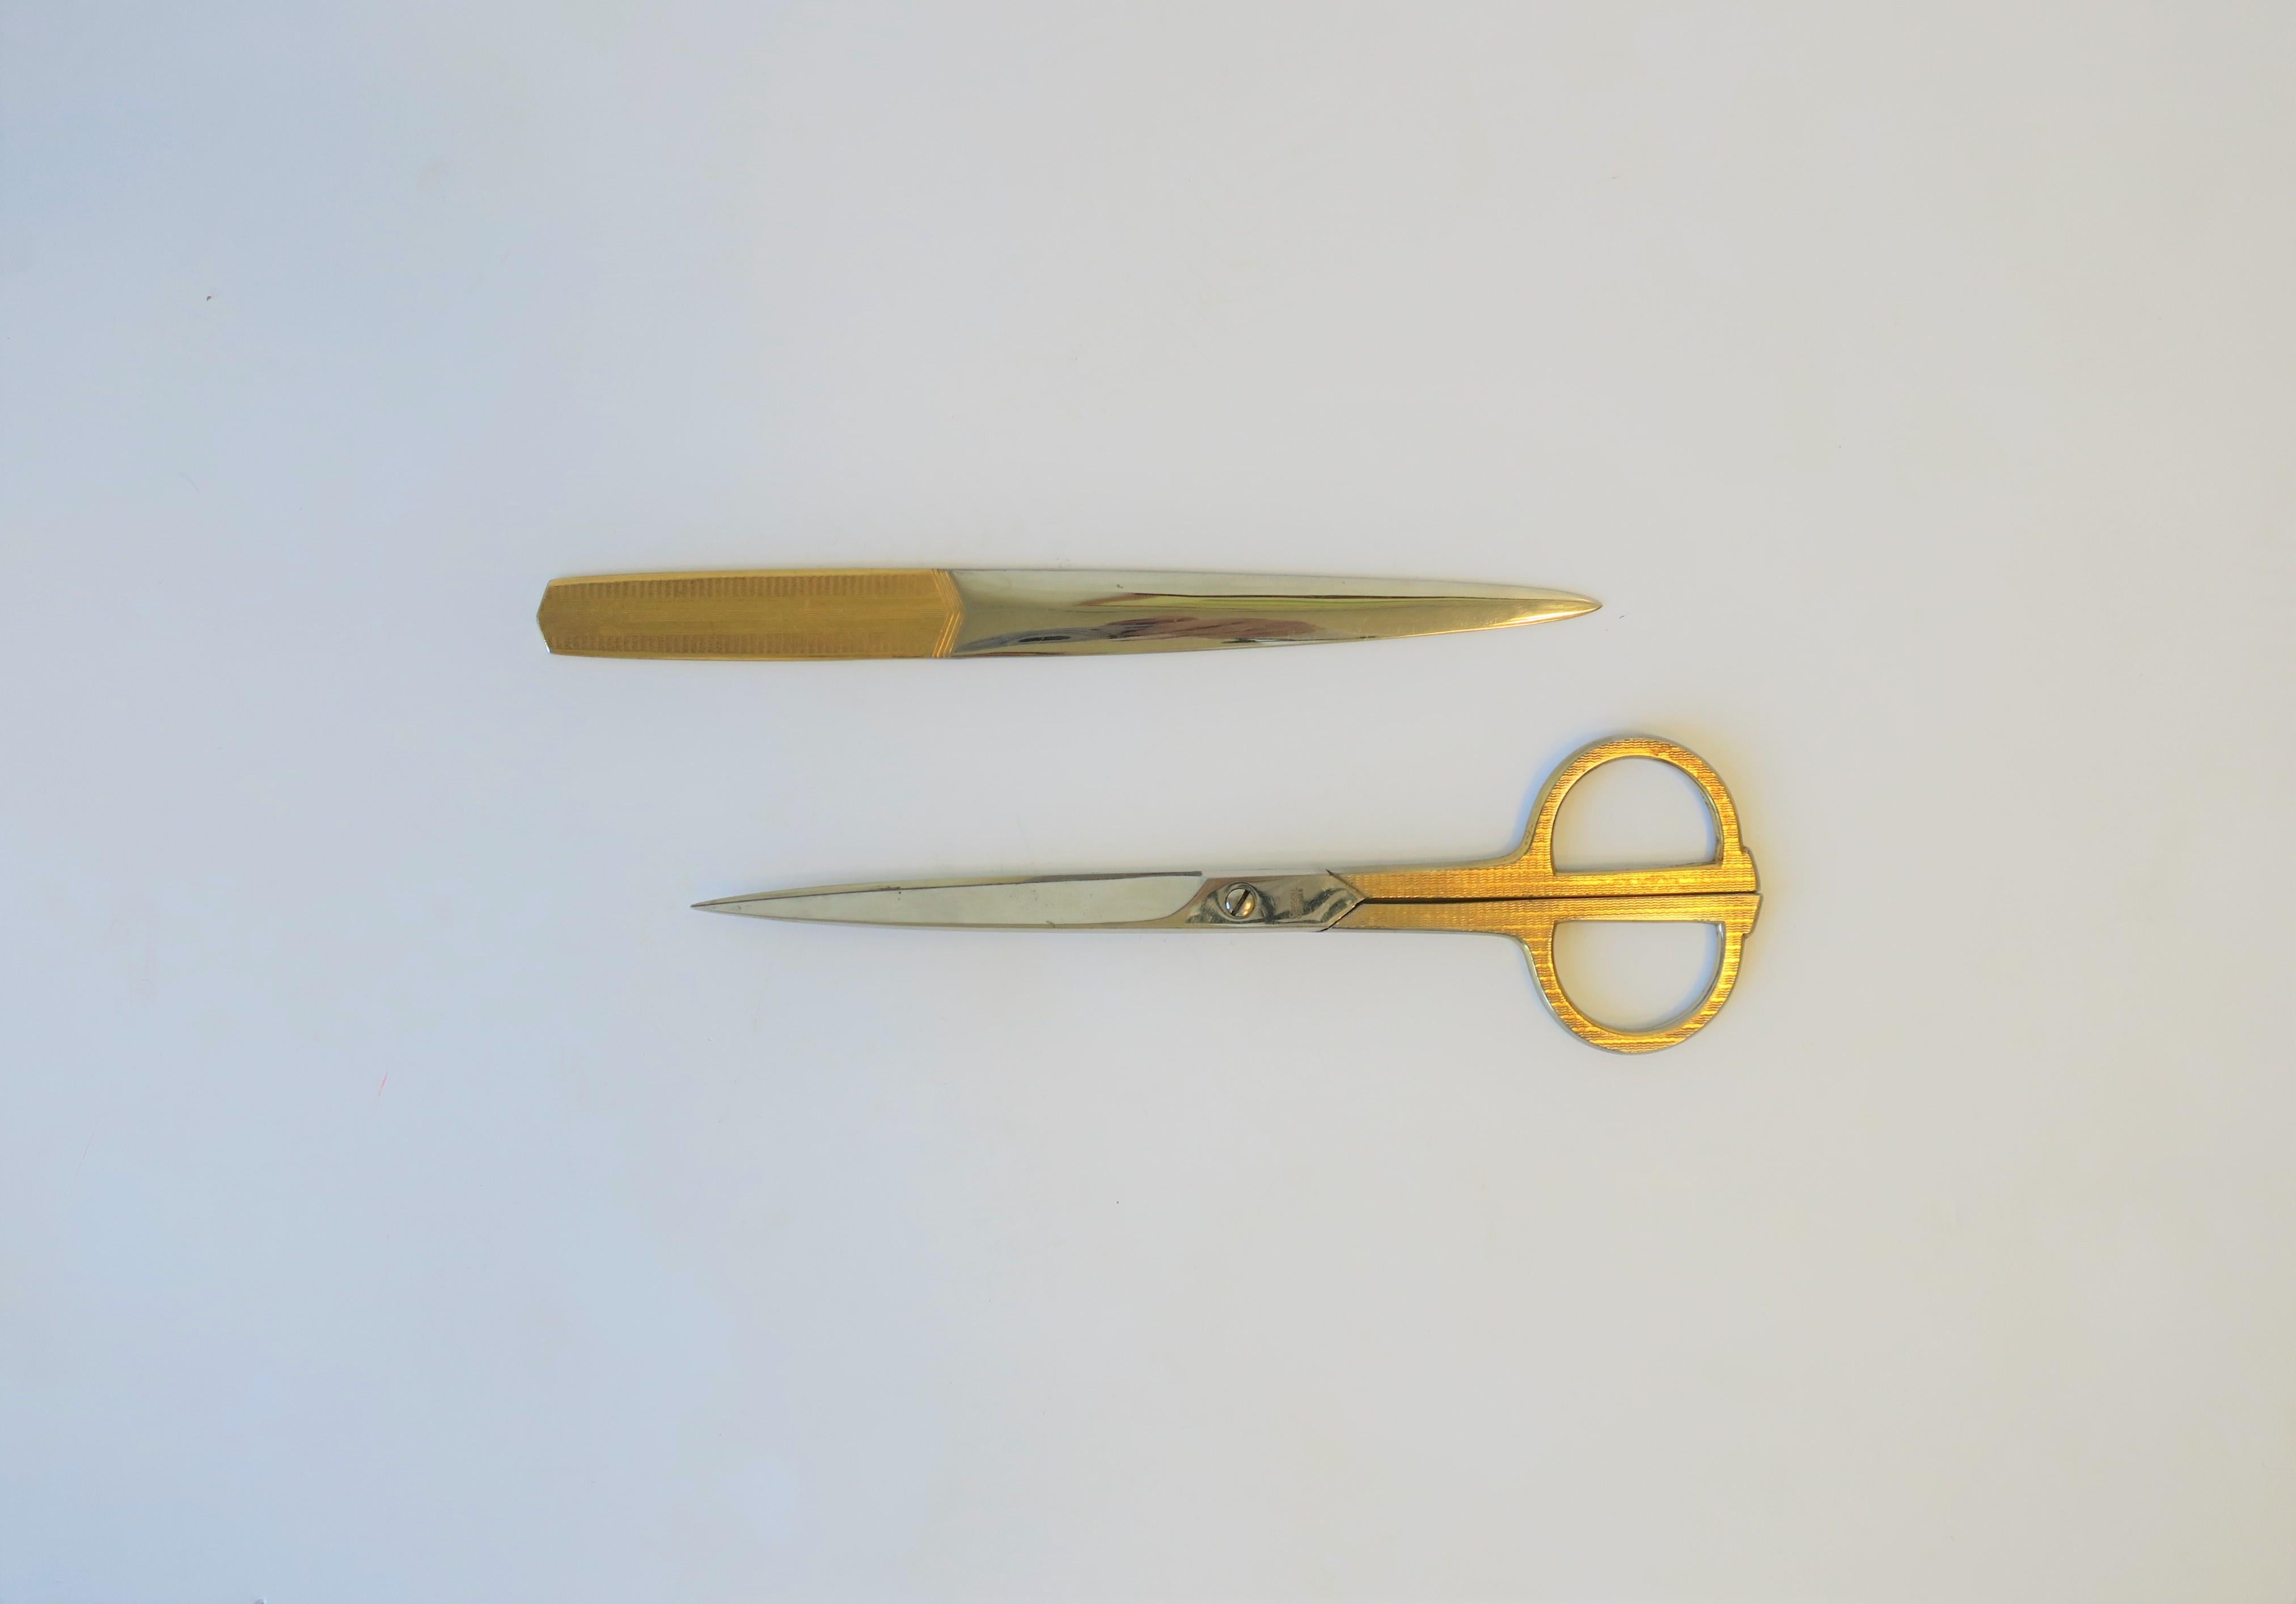 A beautiful set of fine German brass and stainless steel scissors and letter opener by 'Grasoli Solingen', 20th century, Germany. In fine working order. Great for a desk, office, etc. With maker's mark, see images #9 and 10. 

Measures: